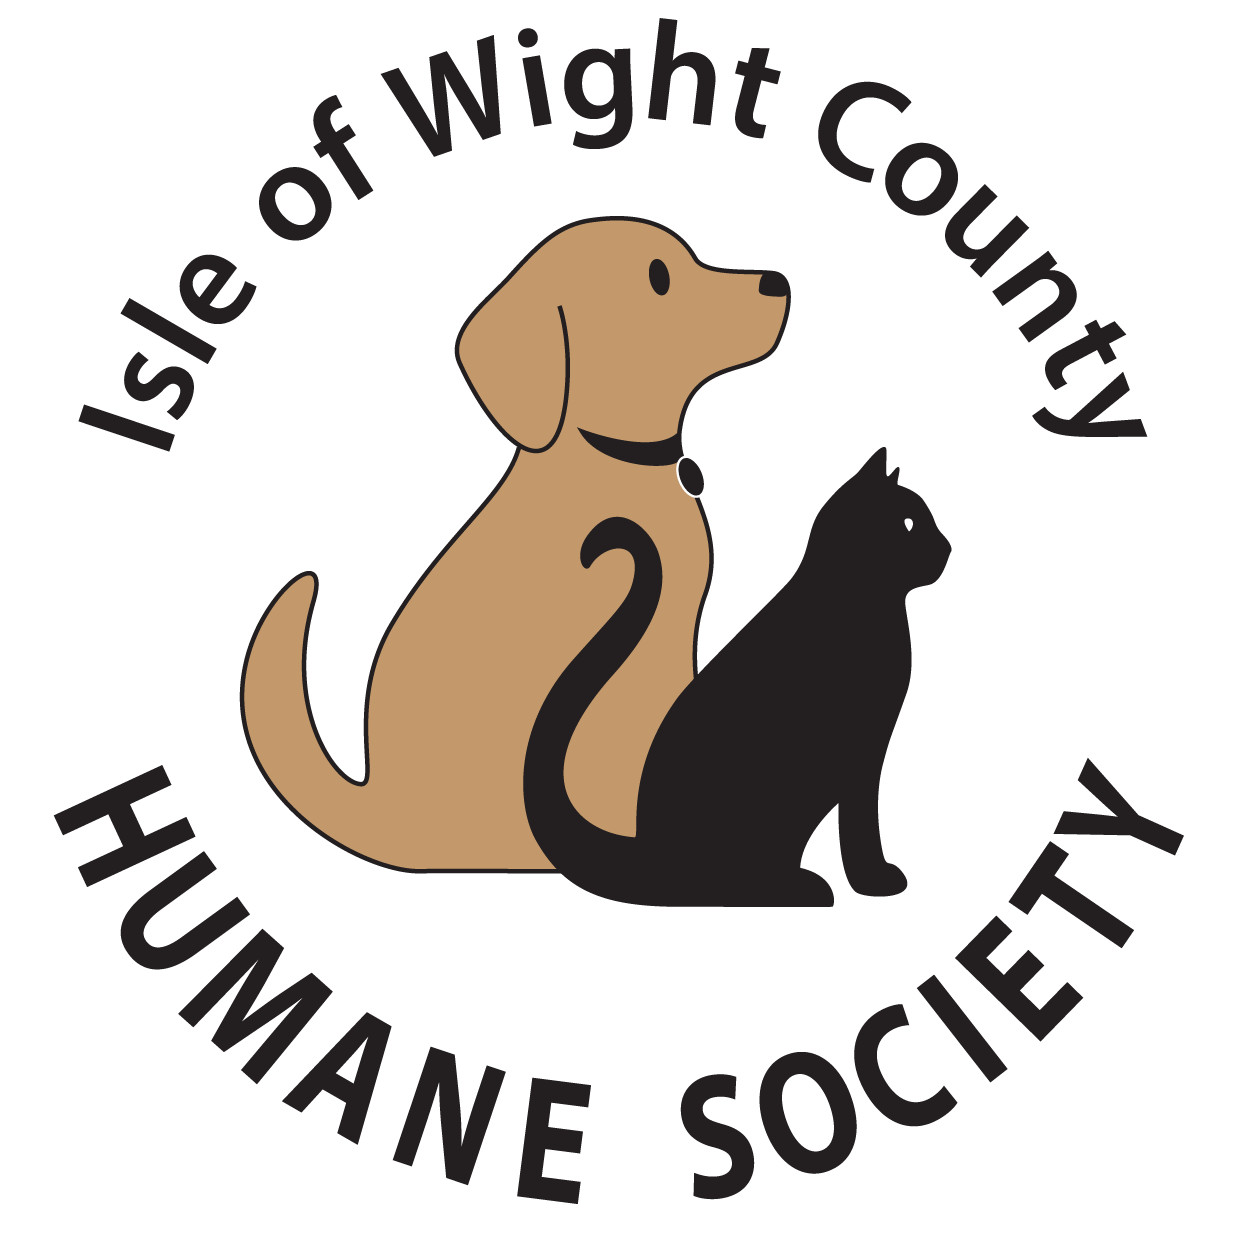 Isle of Wight County Humane Society